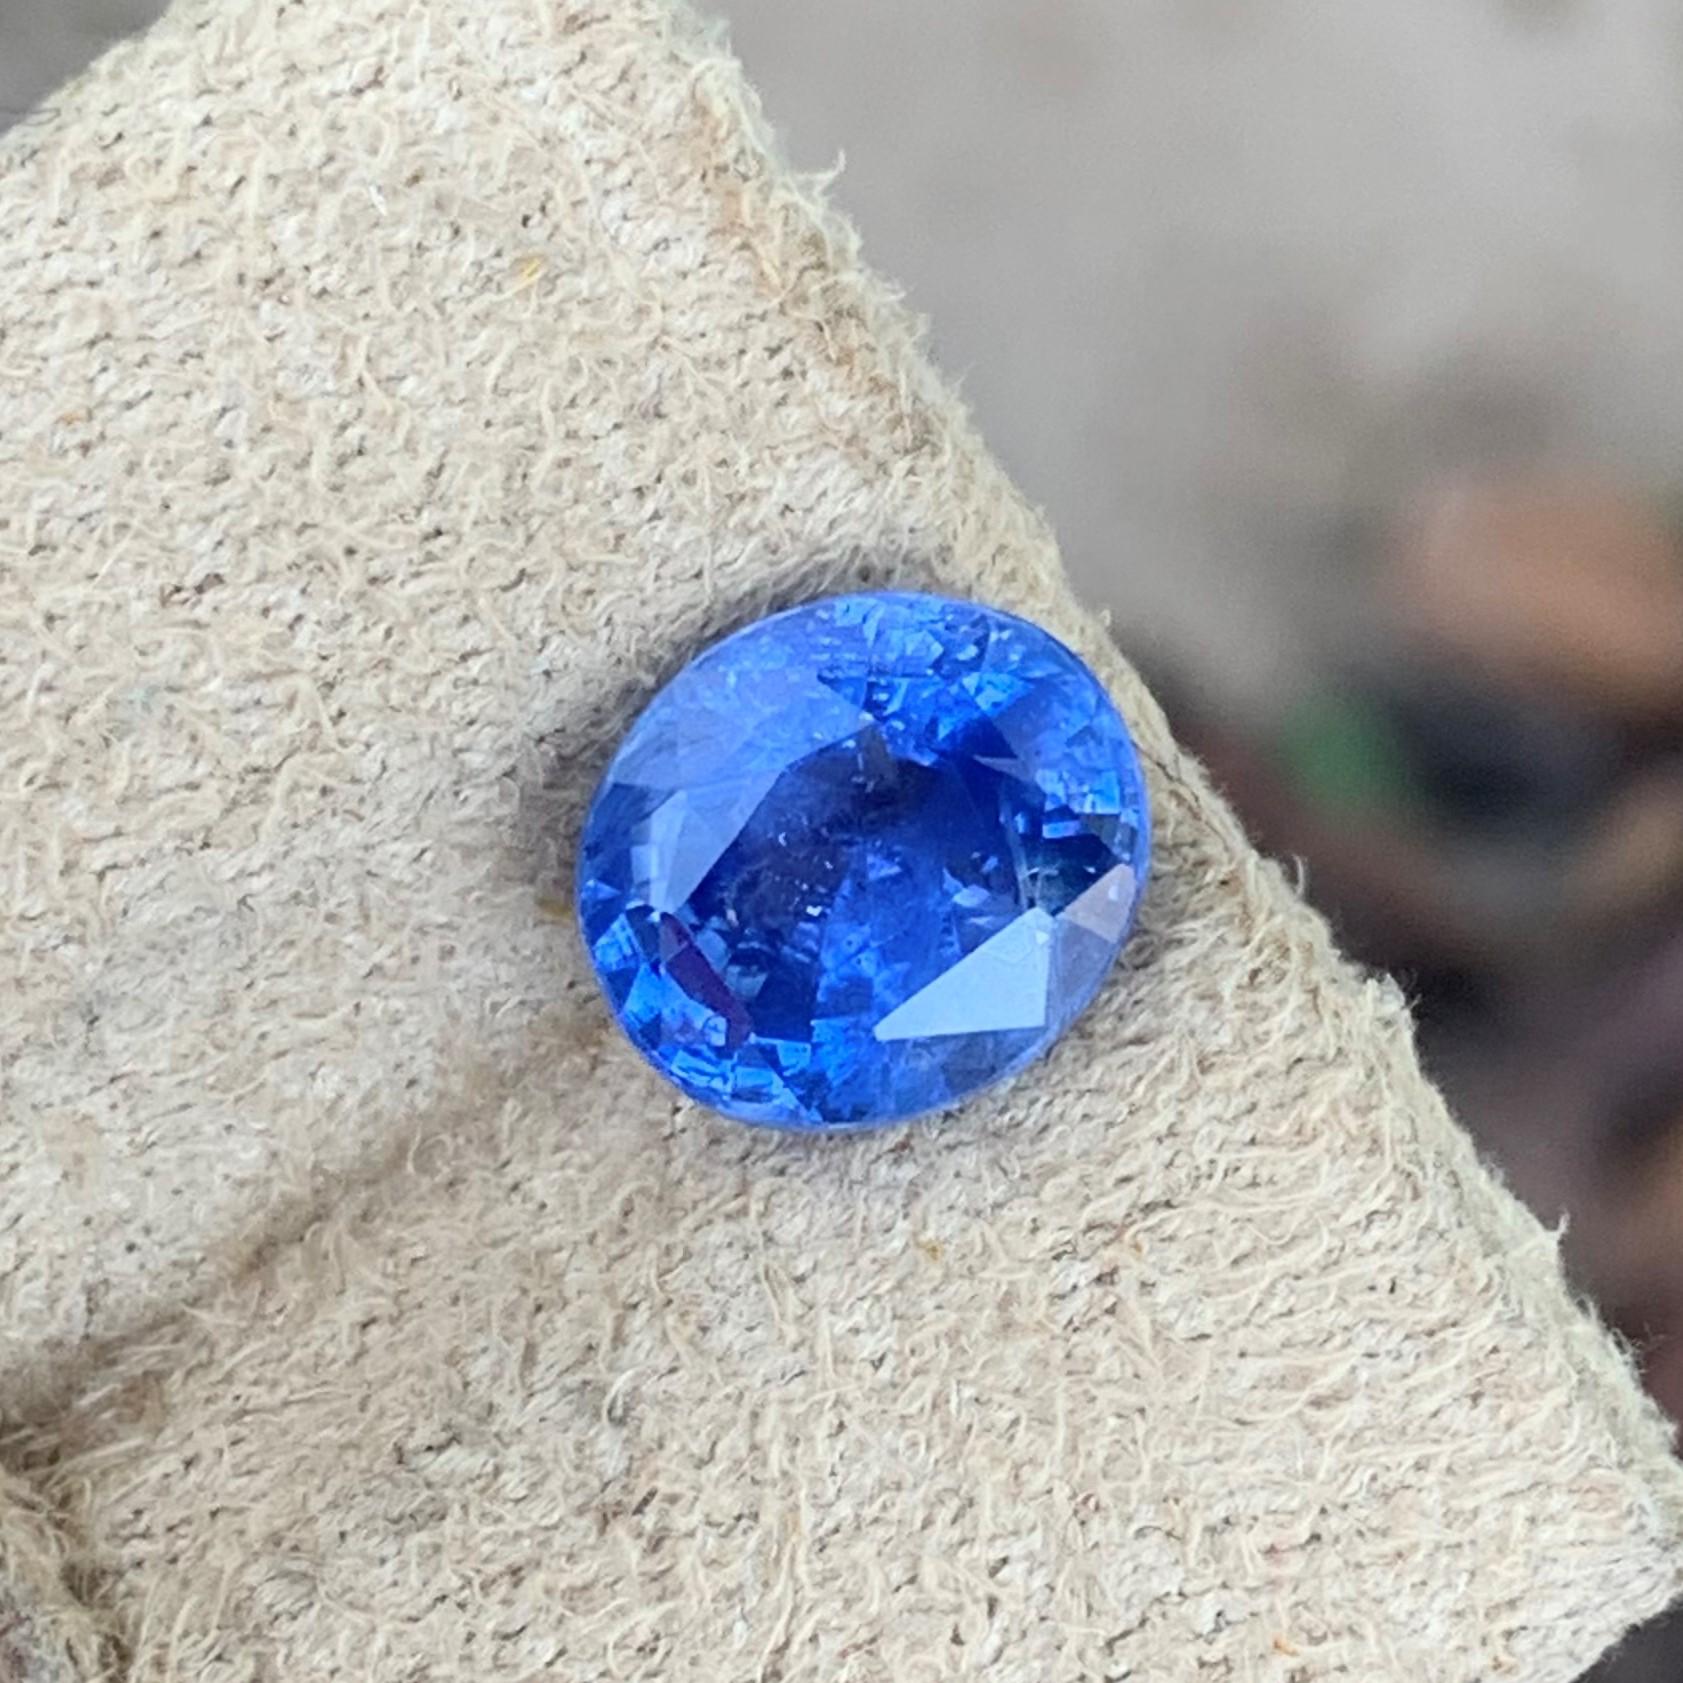 Stunning Blue Sapphire
Weight: 3.10 Carats
Dimension: 8.8x7.9x5.3 Mm
Origin: Srilanka
Shape: Oval
Color: Blue
Treatment: Non
Certificate: On Customer Demand
.
Sapphires are known as the stones of wisdom and serenity. They are used to release mental